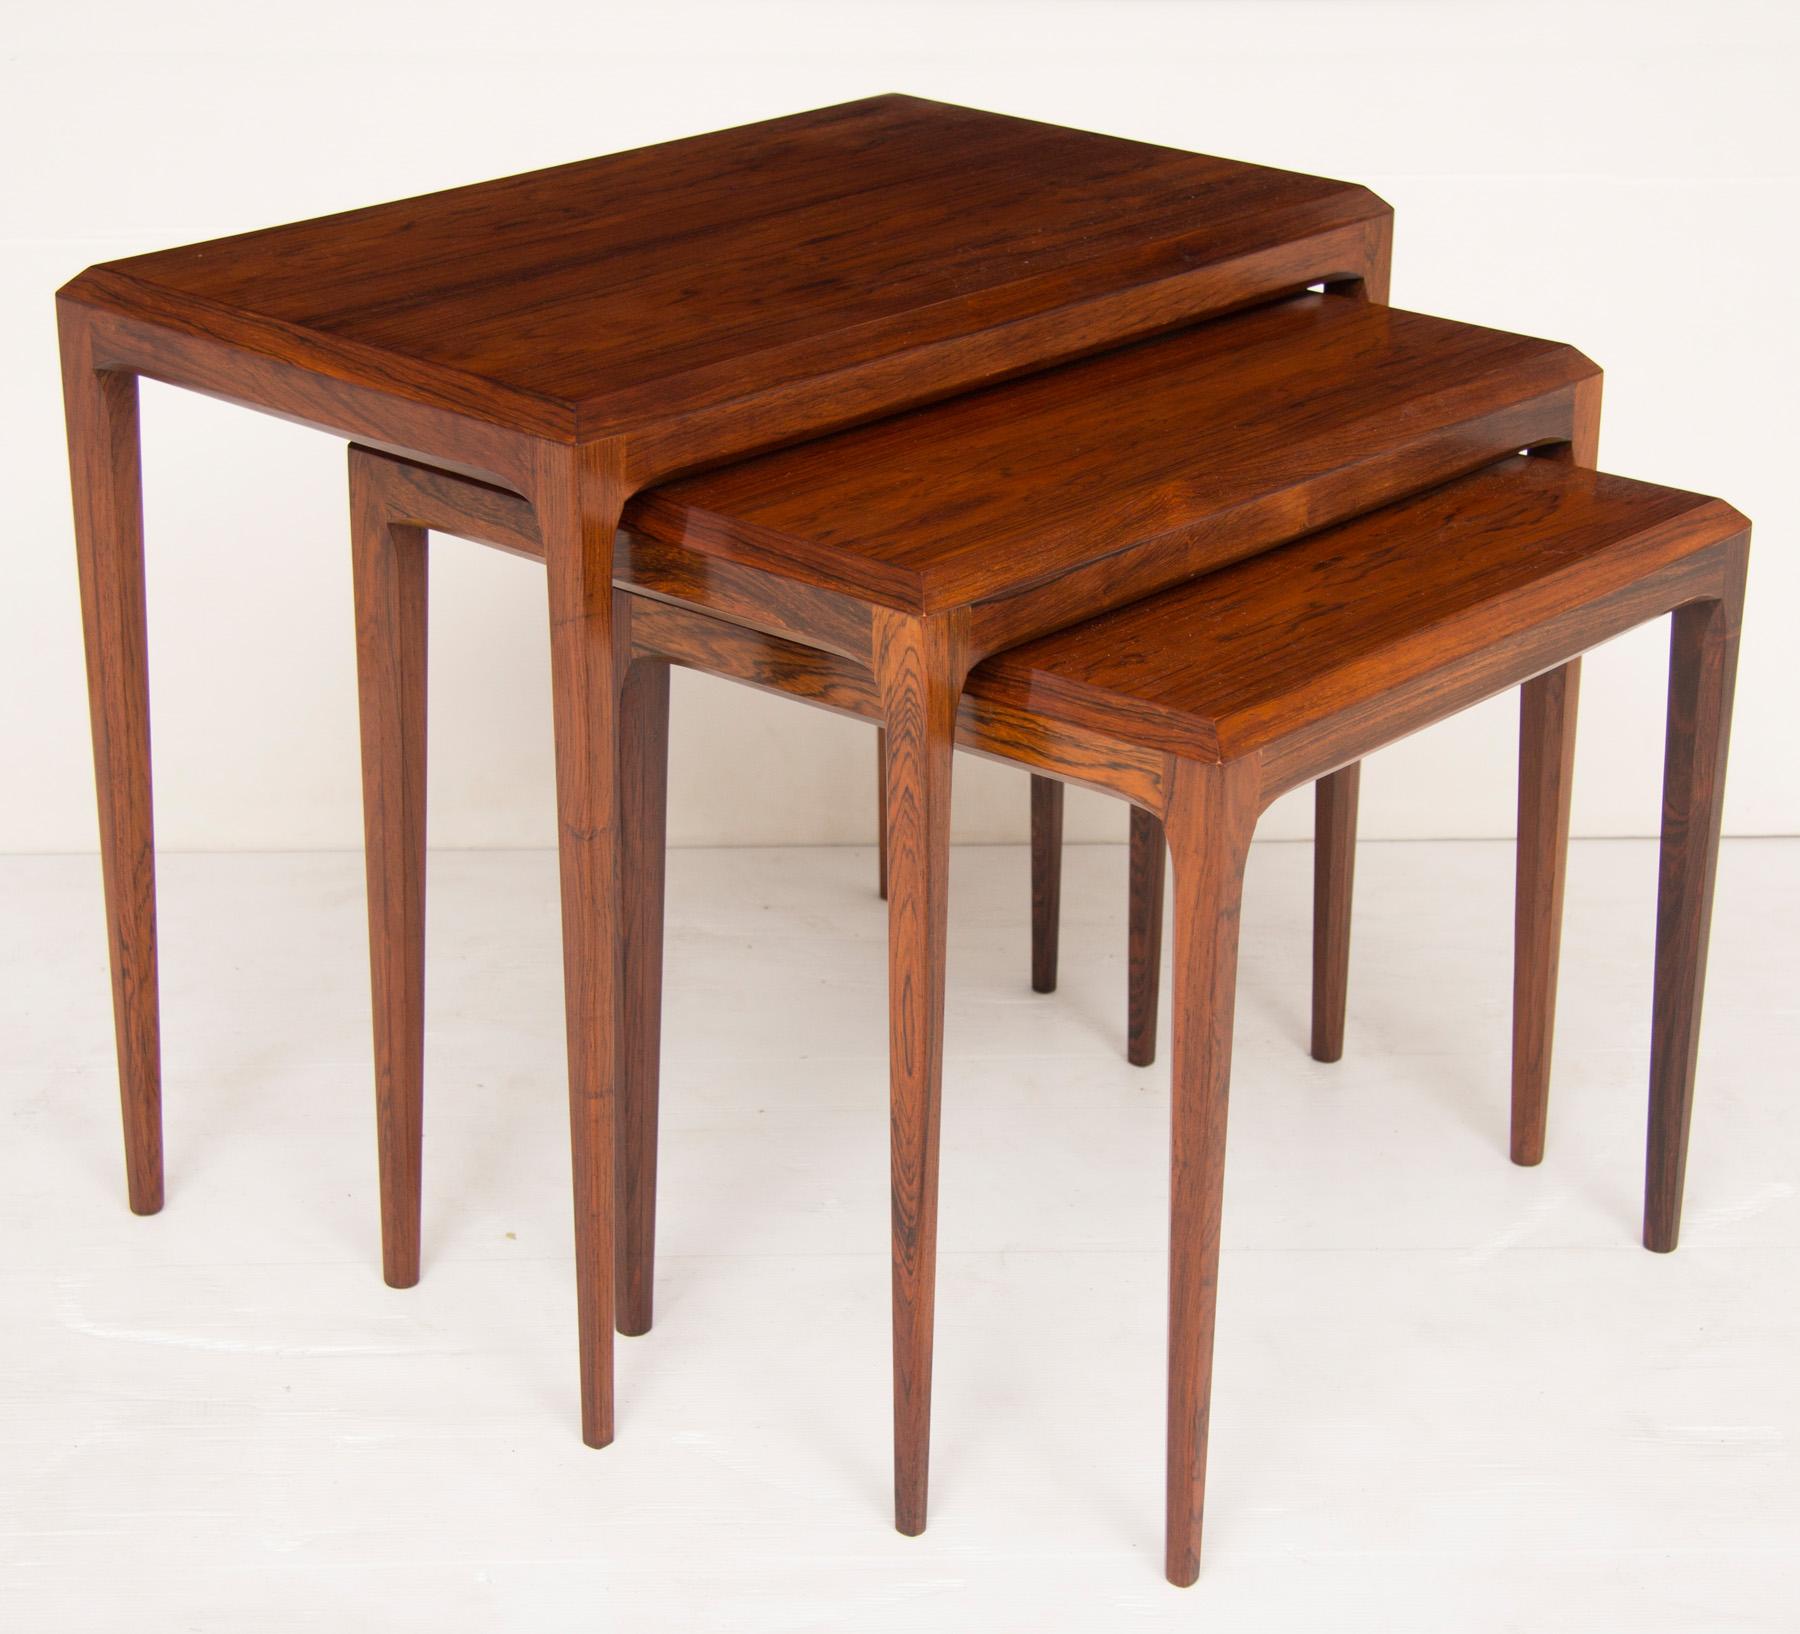 Nest of three tables by Johannes Andersen manufactured by Silkeborg.